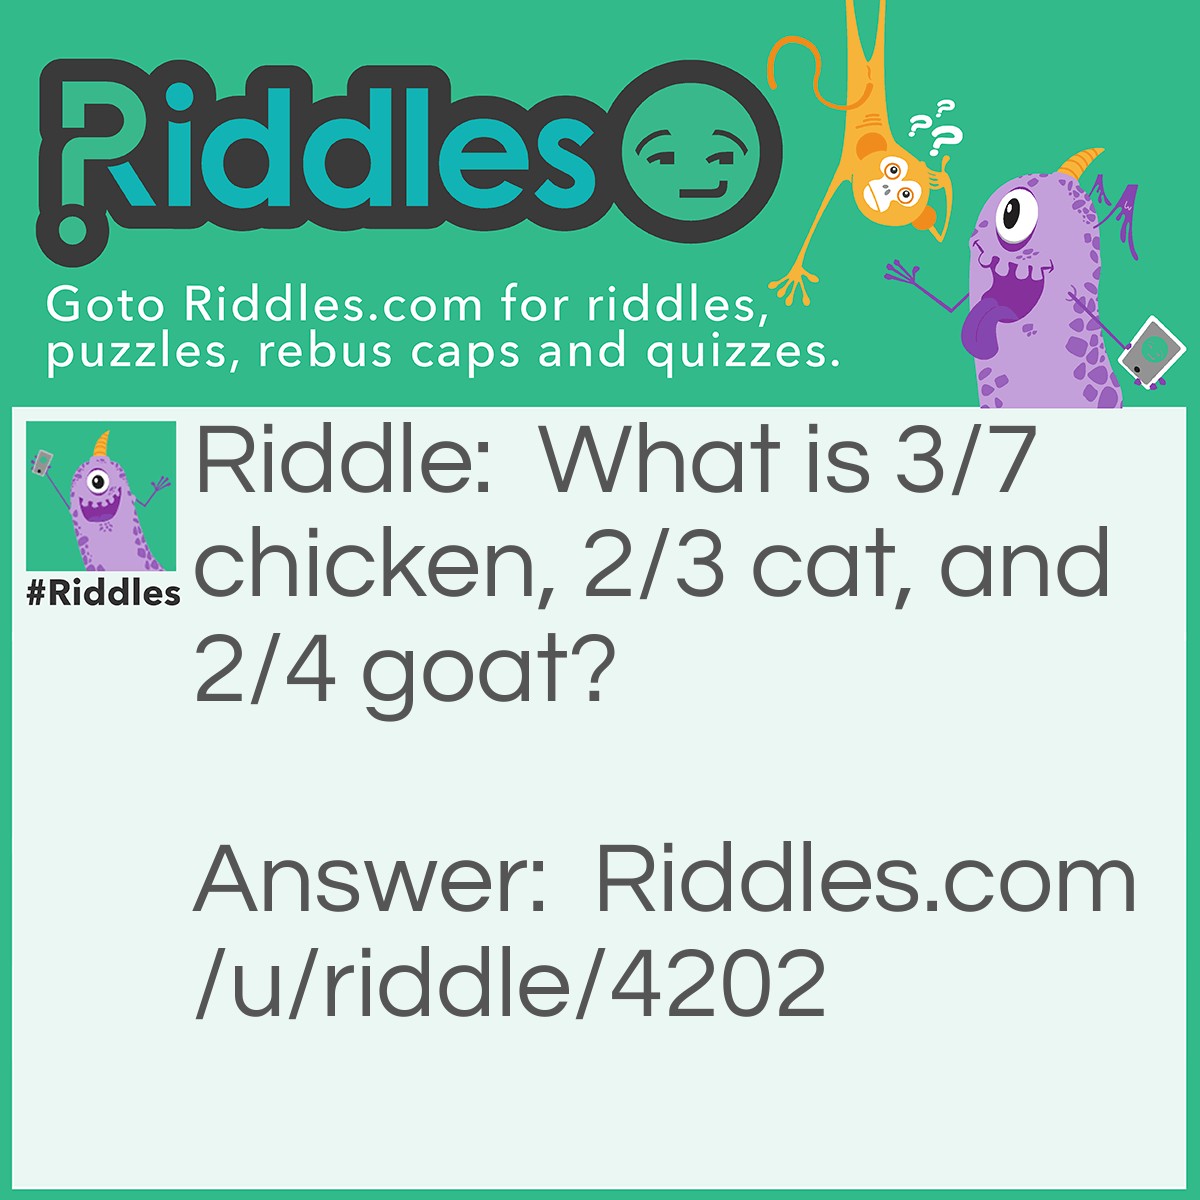 Riddle: What is 3/7 chicken, 2/3 cat, and 2/4 goat? Answer: Chicago 3/7 of chicken is CHI, 2/3 of cat is CA, and 2/4 goat is GO. CHI CA GO